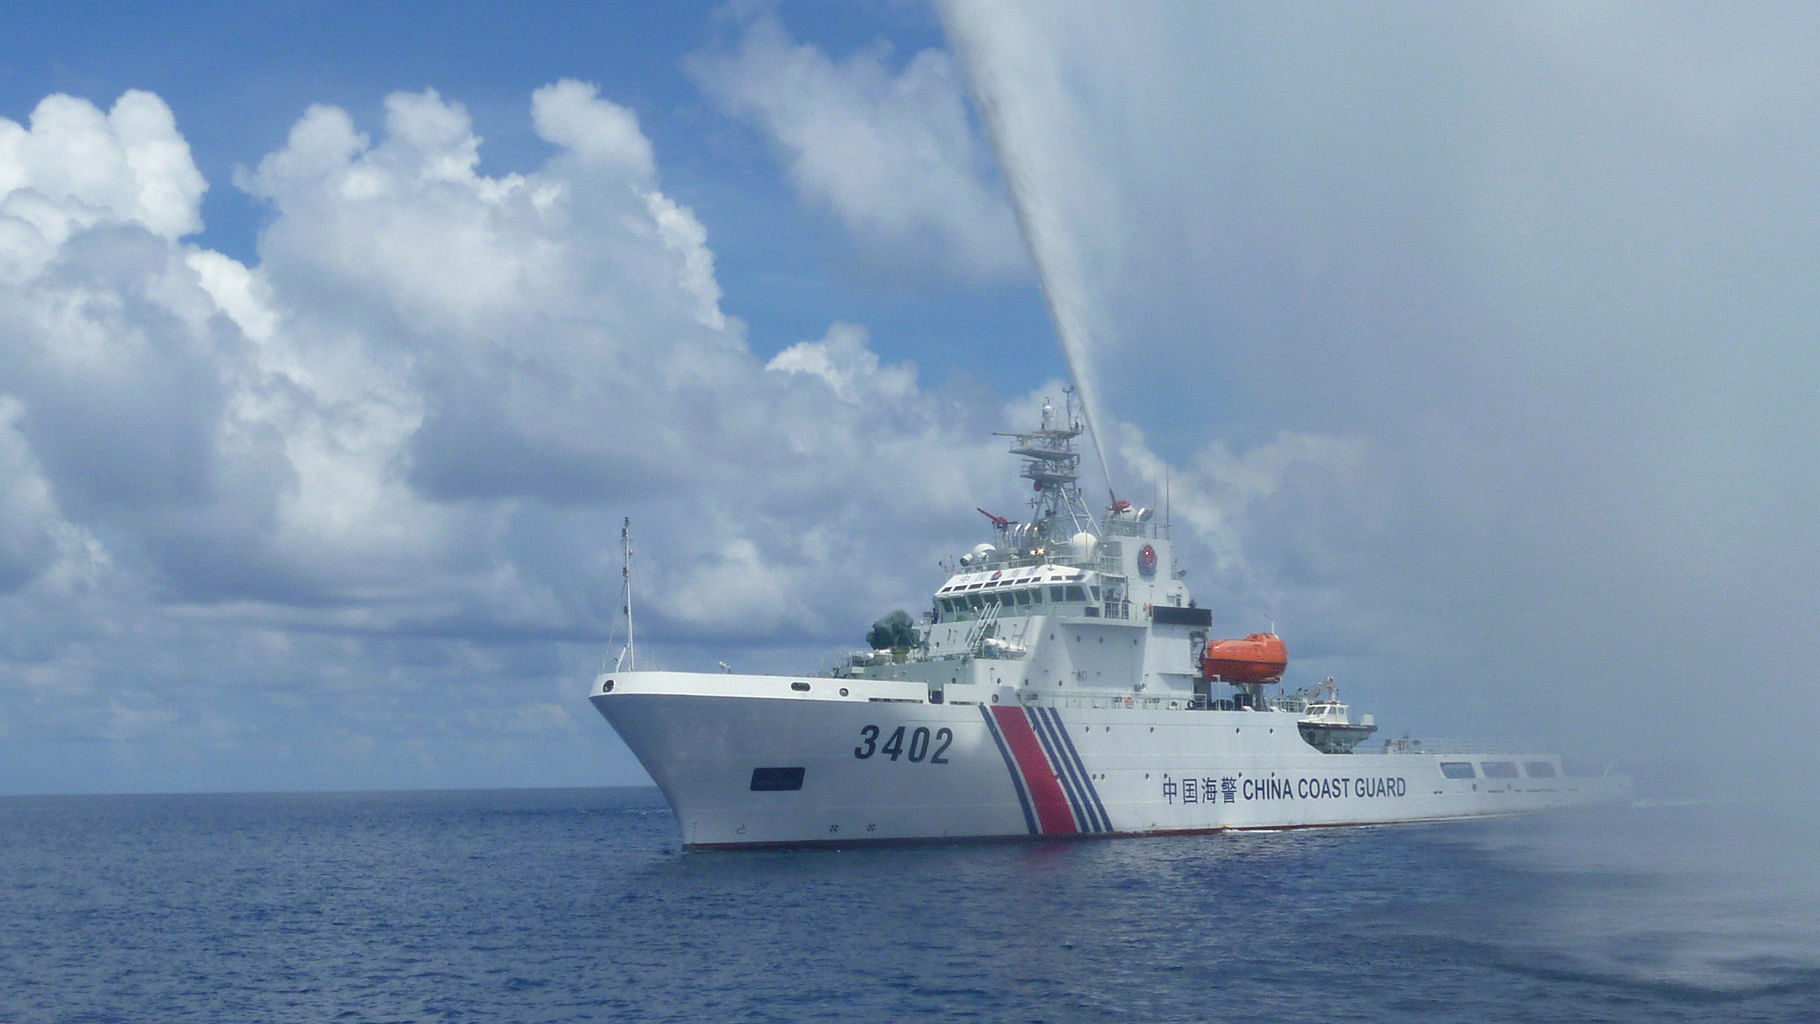 

The Hague rejected China’s claims to economic rights across large swathes of the South China Sea in a verdict in July 2016. (Photo: AP)